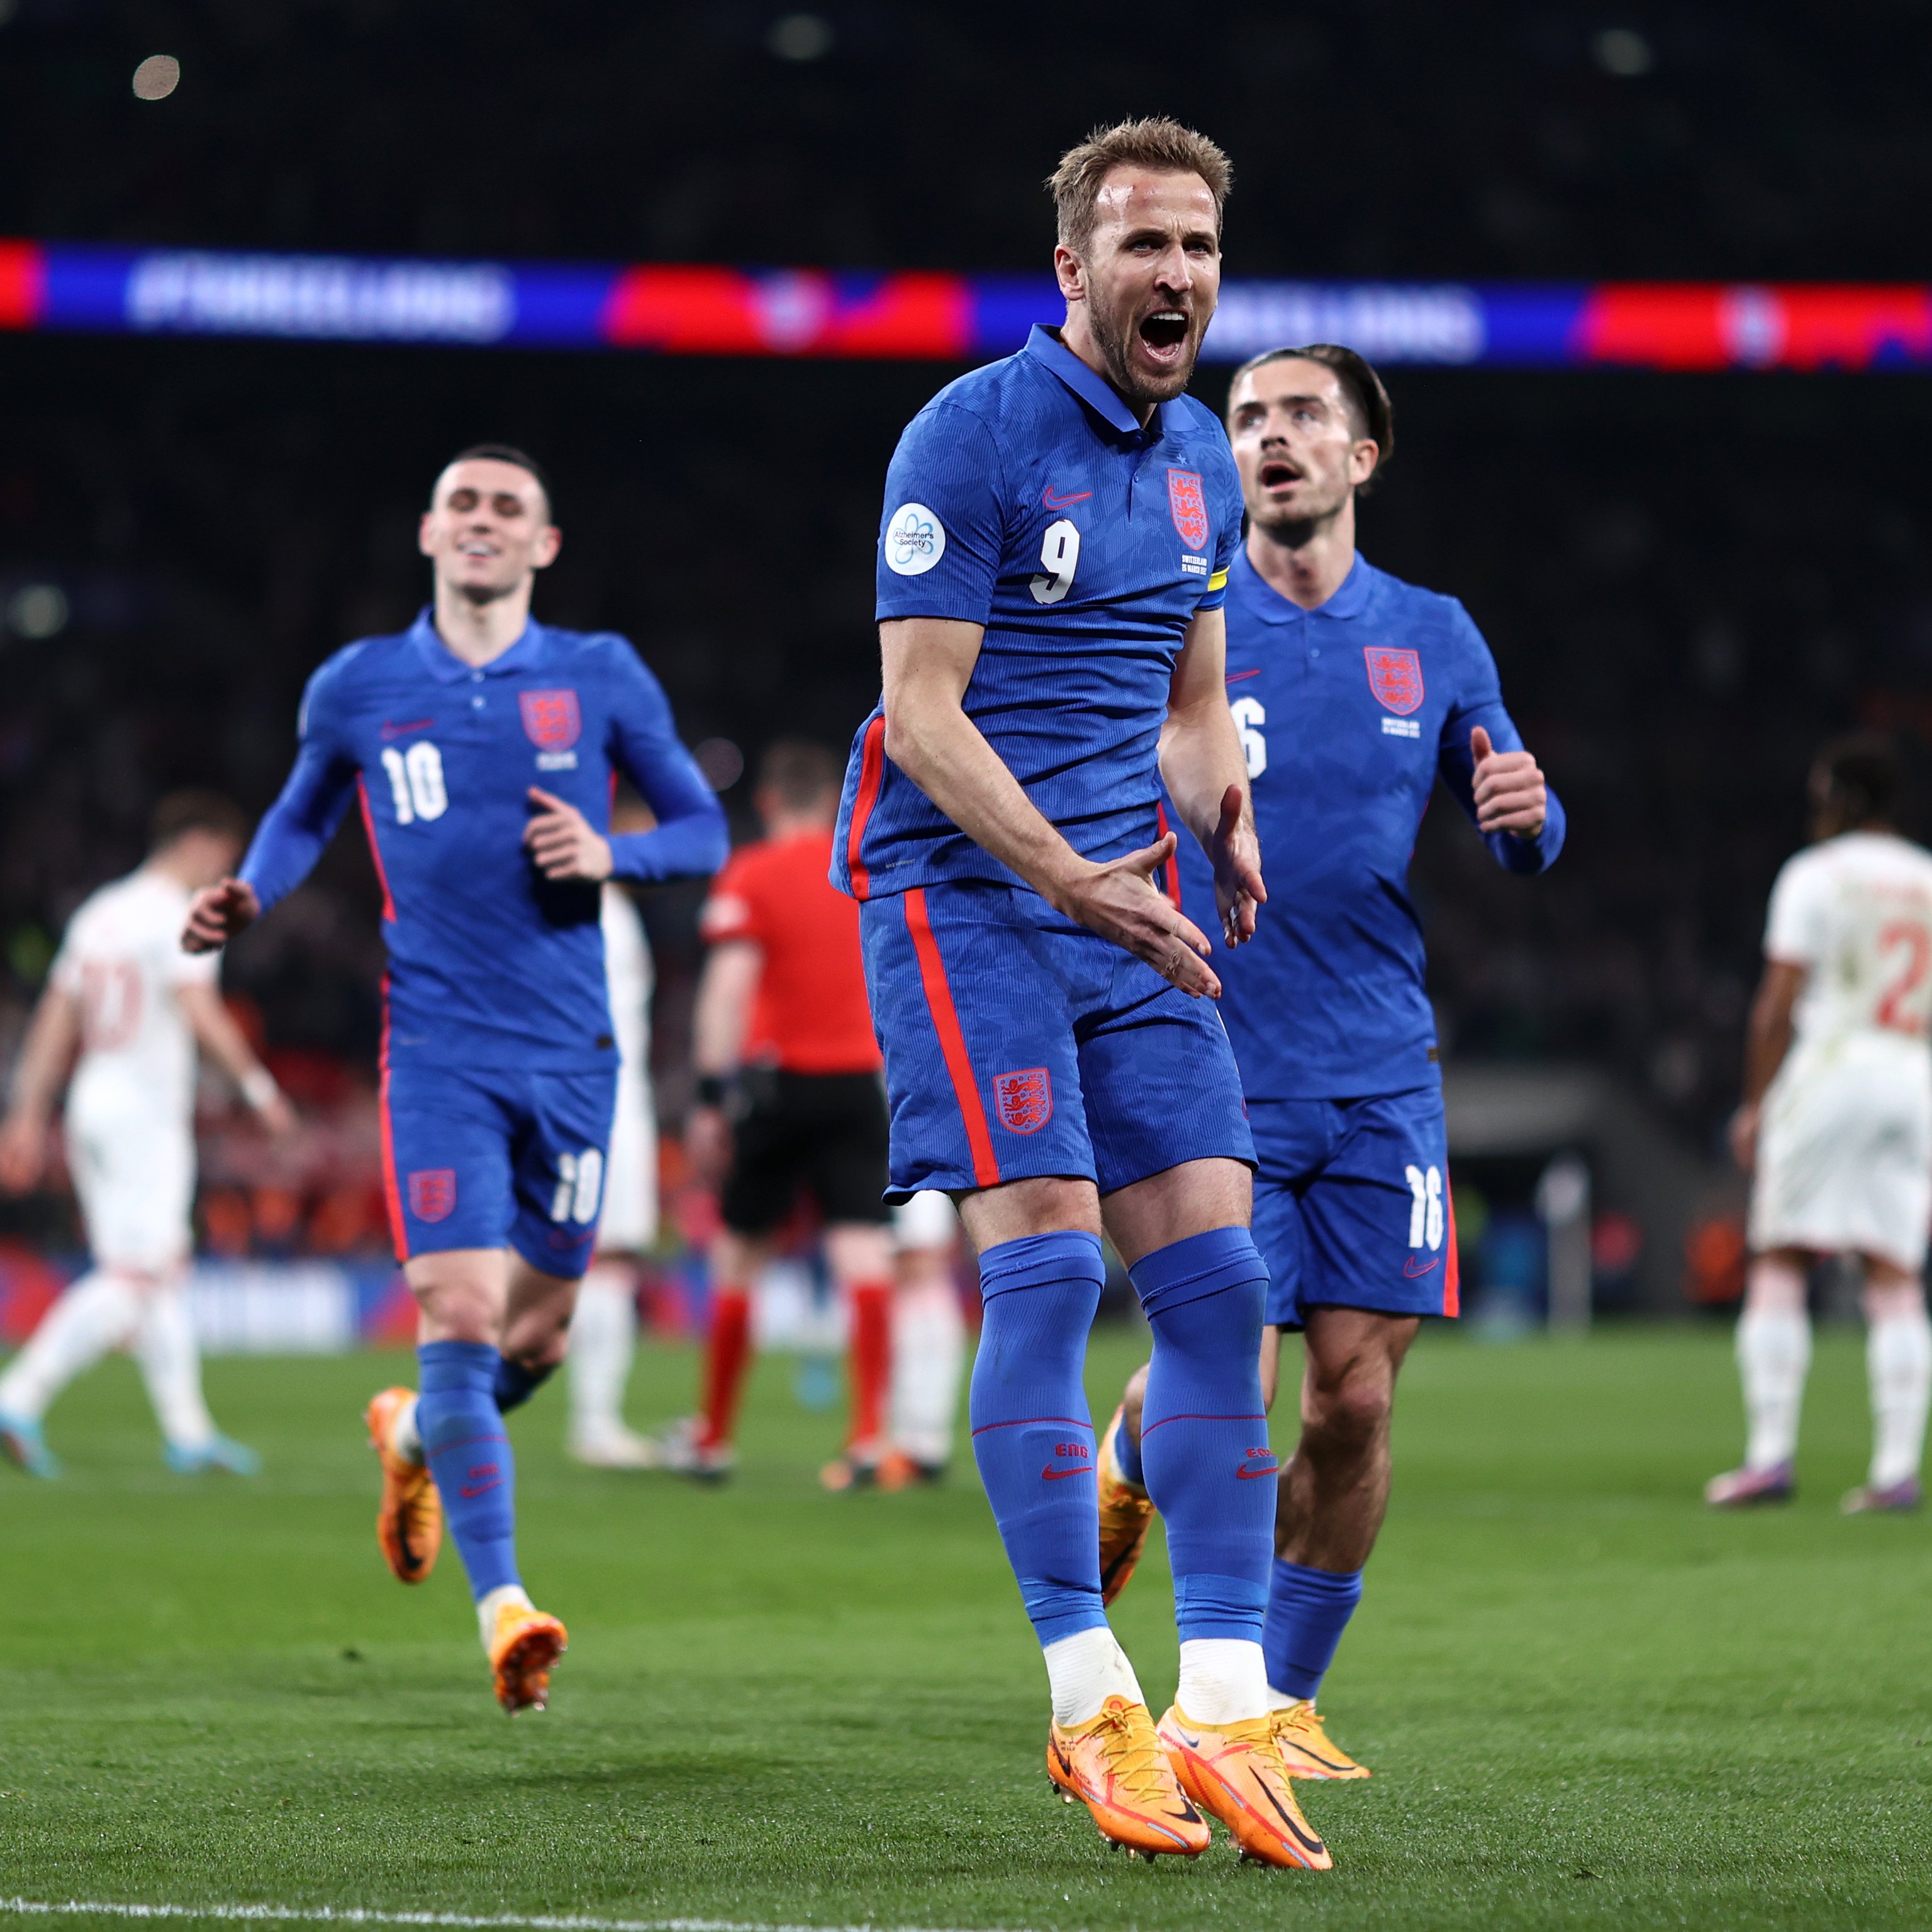 England 2-1 Switzerland Highlights: Harry Kane scores the winner from the penalty spot as England come from behind to win at Wembley against the Swiss